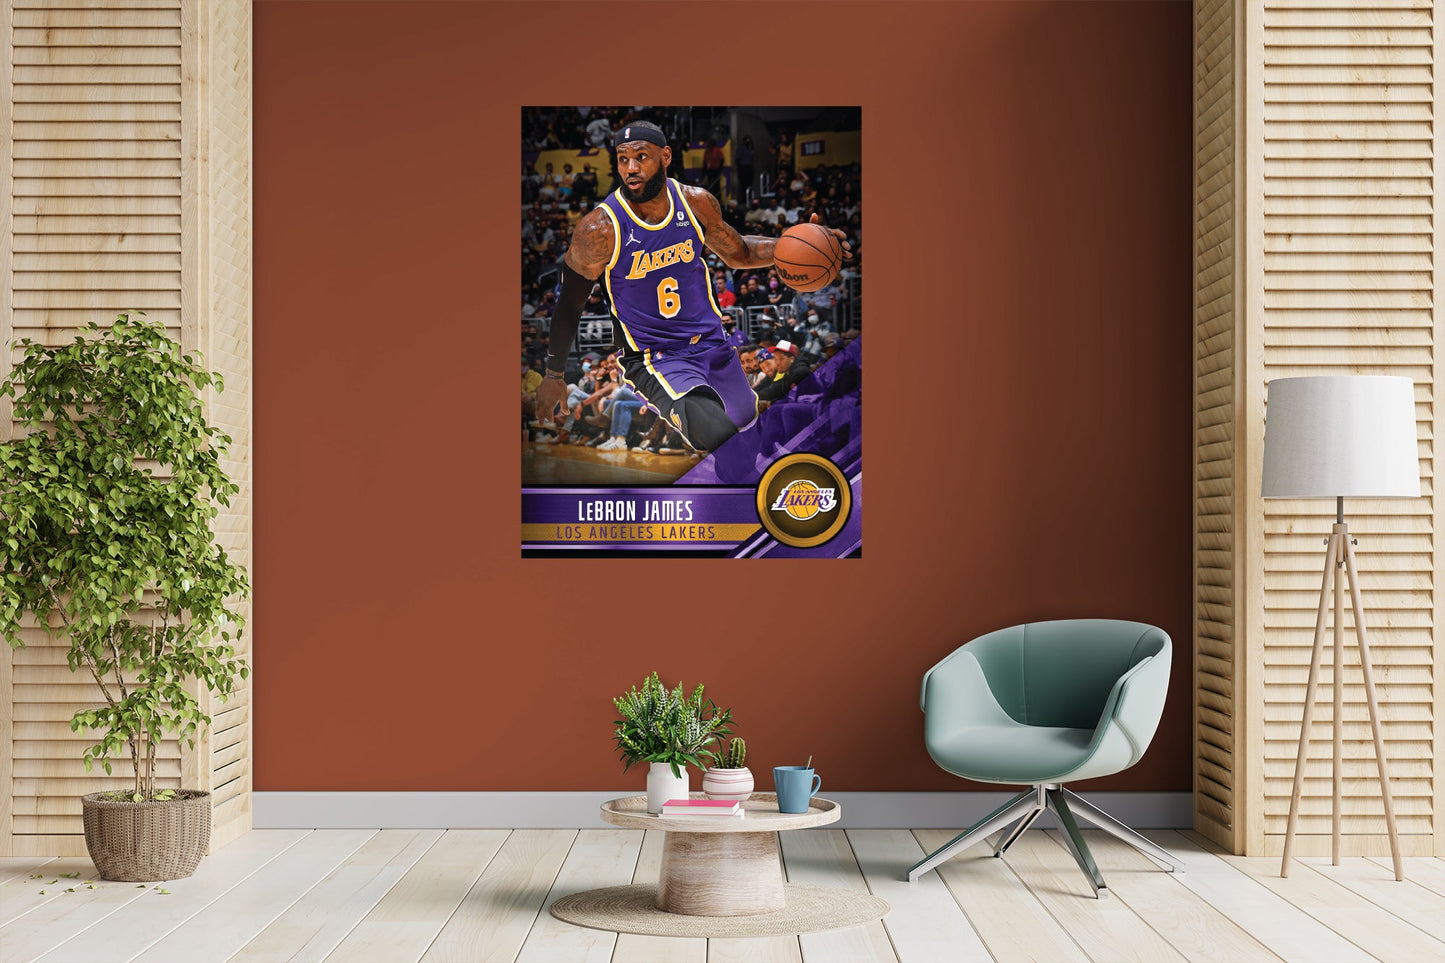 Los Angeles Lakers: LeBron James Poster - Officially Licensed NBA Removable Adhesive Decal